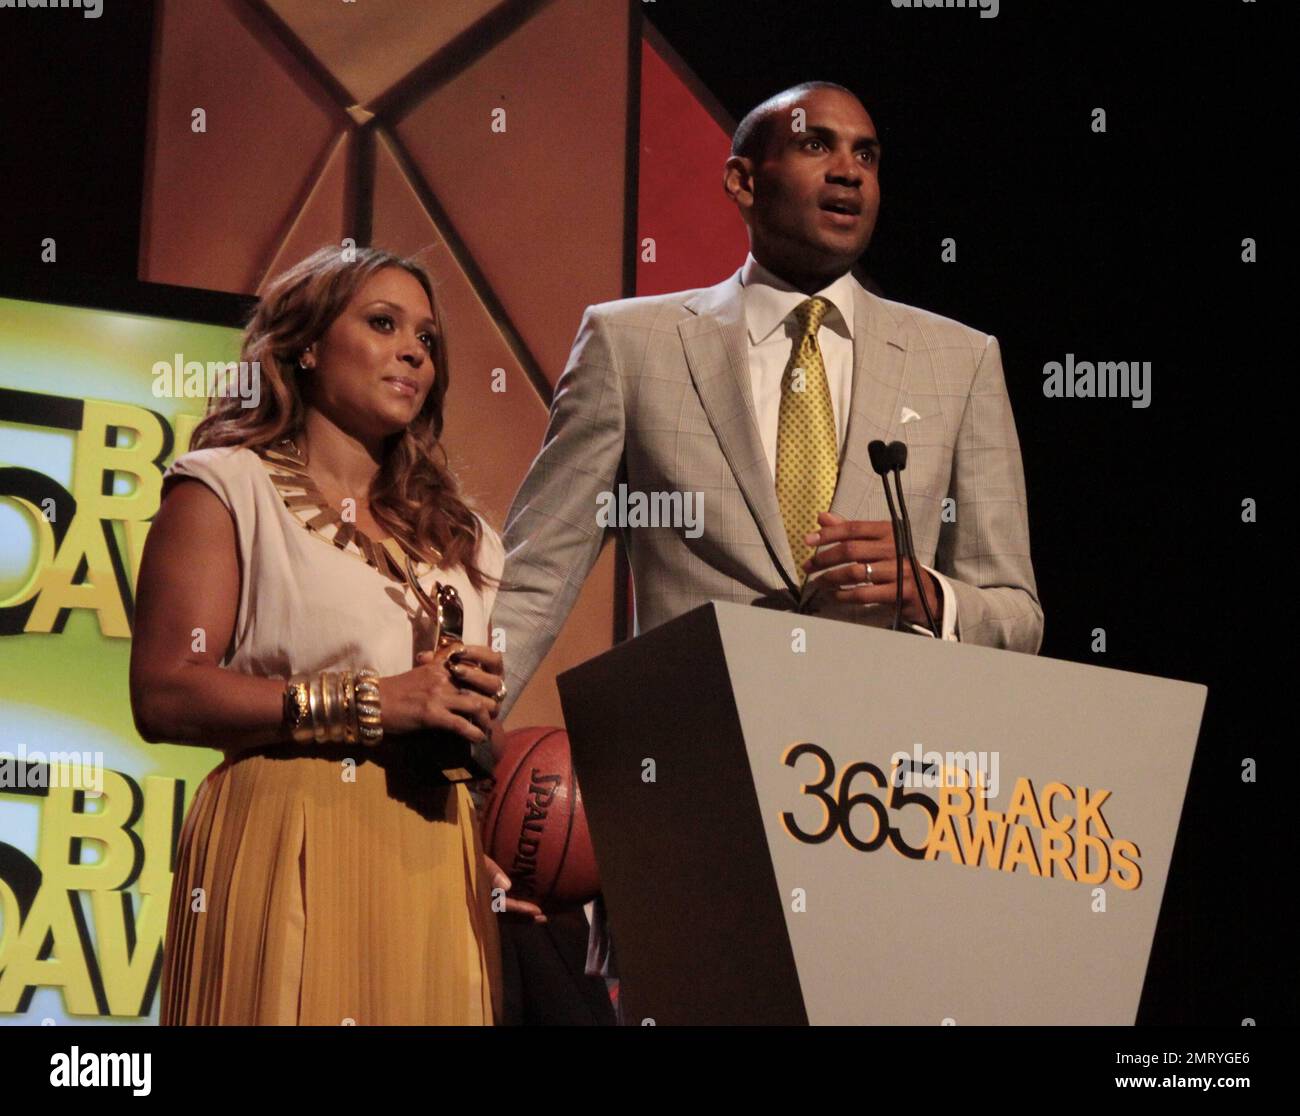 C R&B singer Tamia and husband Grant Hill of the Phoenix Suns give their acceptance speech while being honored during the McDonald's 365 Black Awards held at the Mahalia Jackson Theatre in New Orleans, Louisiana. 6th July 2012. Stock Photo